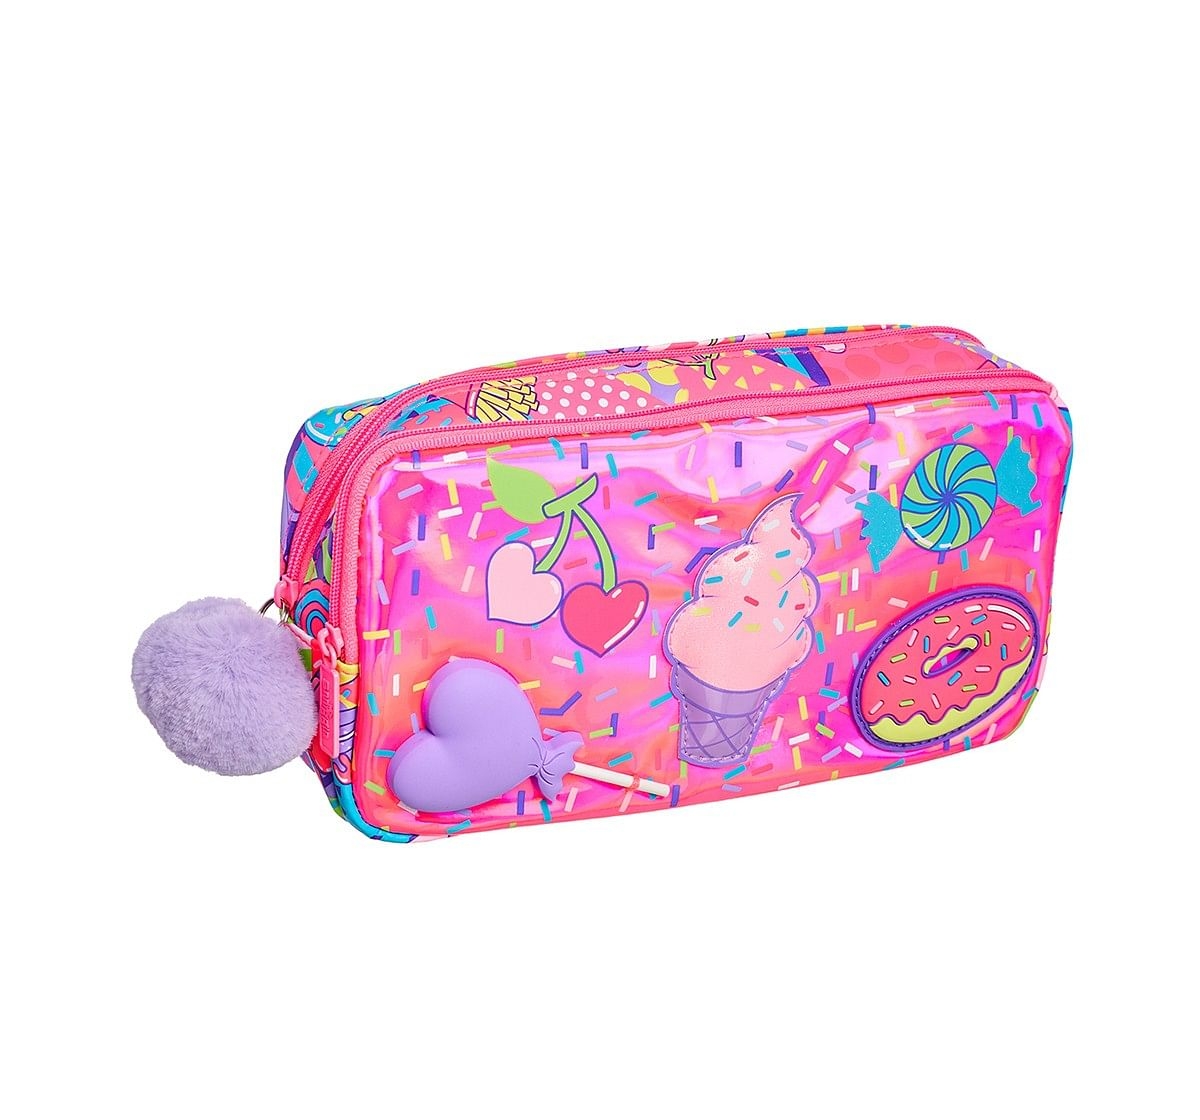 Smiggle Far Away Character Pencil Case - Ice-cream Print Bags for Kids age 3Y+ (Pink)